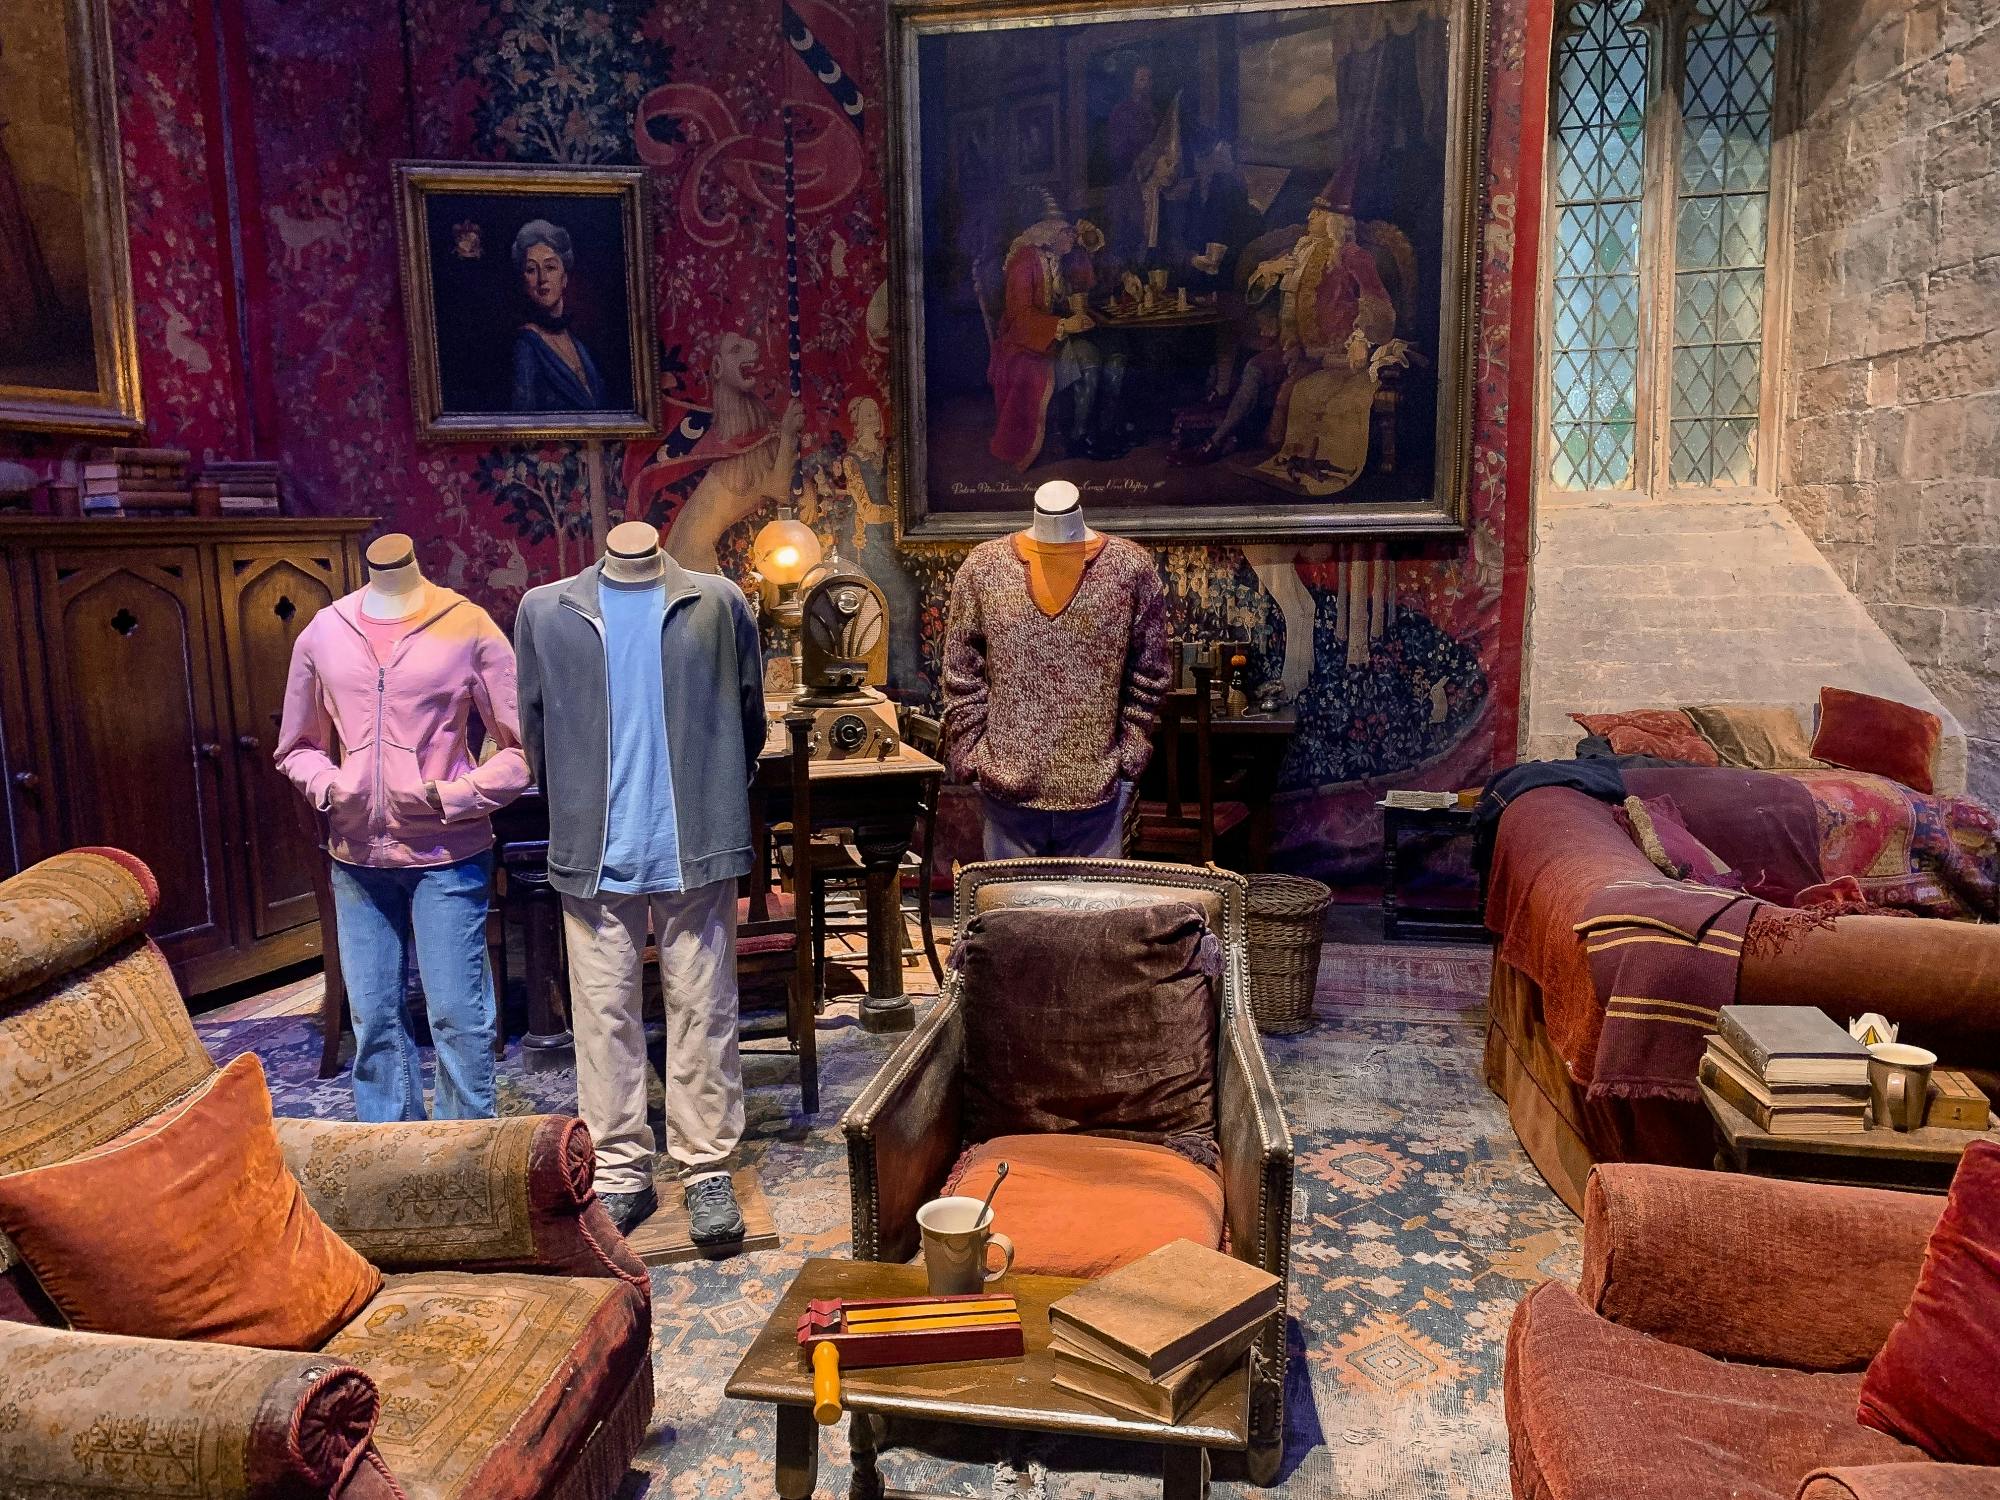 Harry Potter Studios and walking tour of London film locations